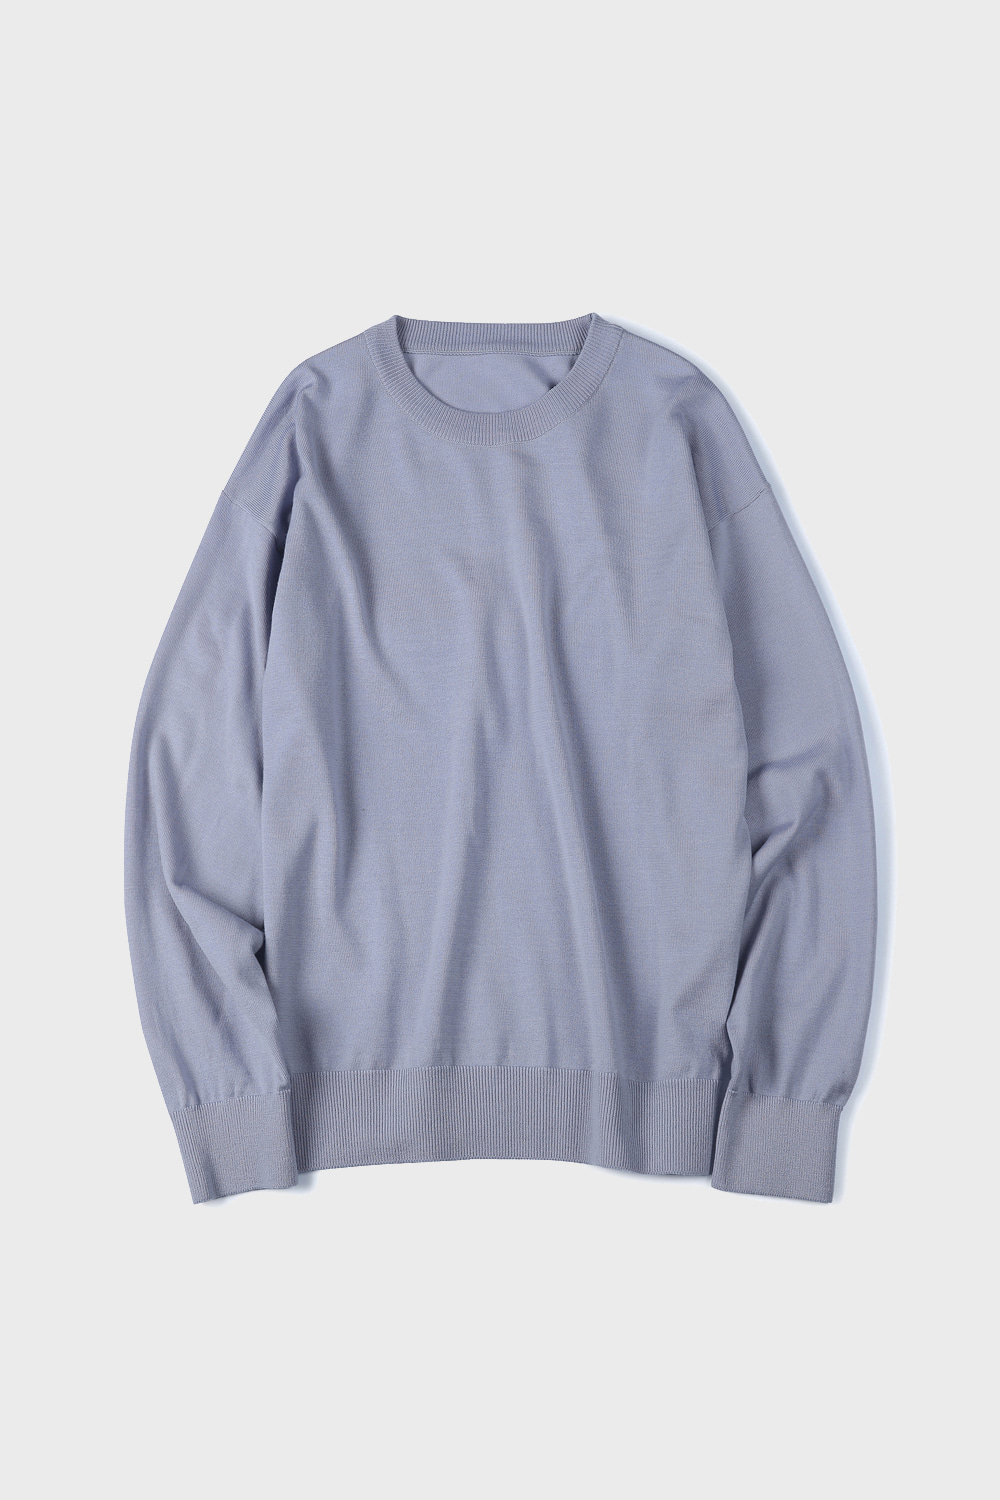 WASHABLE PURE WOOL CREW NECK KNIT (LAVENDER)